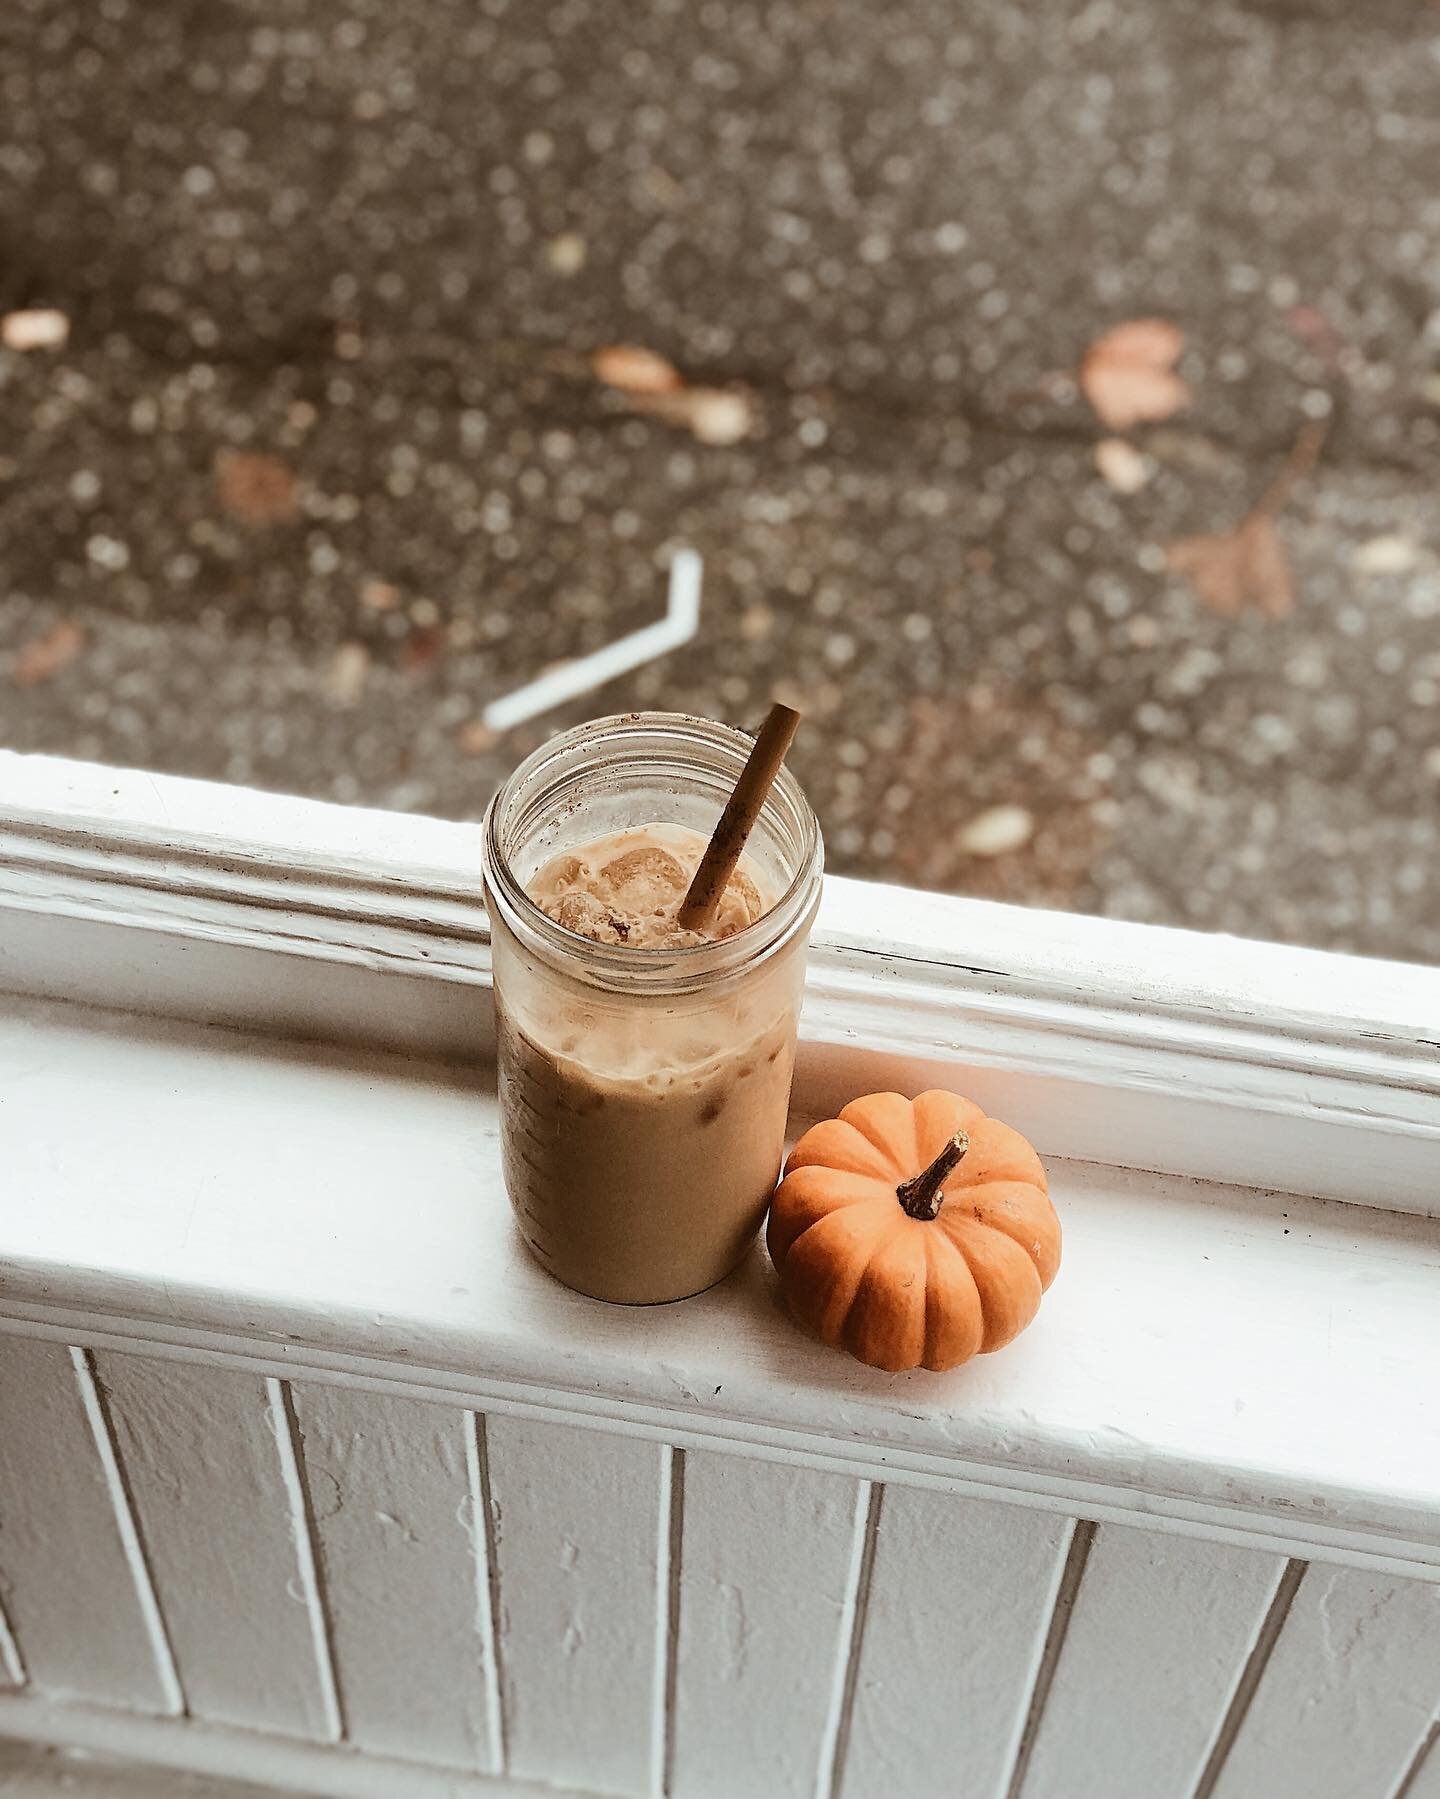 It&rsquo;s not too late in the season to enjoy an iced coffee or pumpkin flavored things!  Treat yourself to something delicious on this gorgeous fall day-we&rsquo;re open till 2! 

#beantrustcoffeebar #beverlymassachusetts
#beantrustcommunity